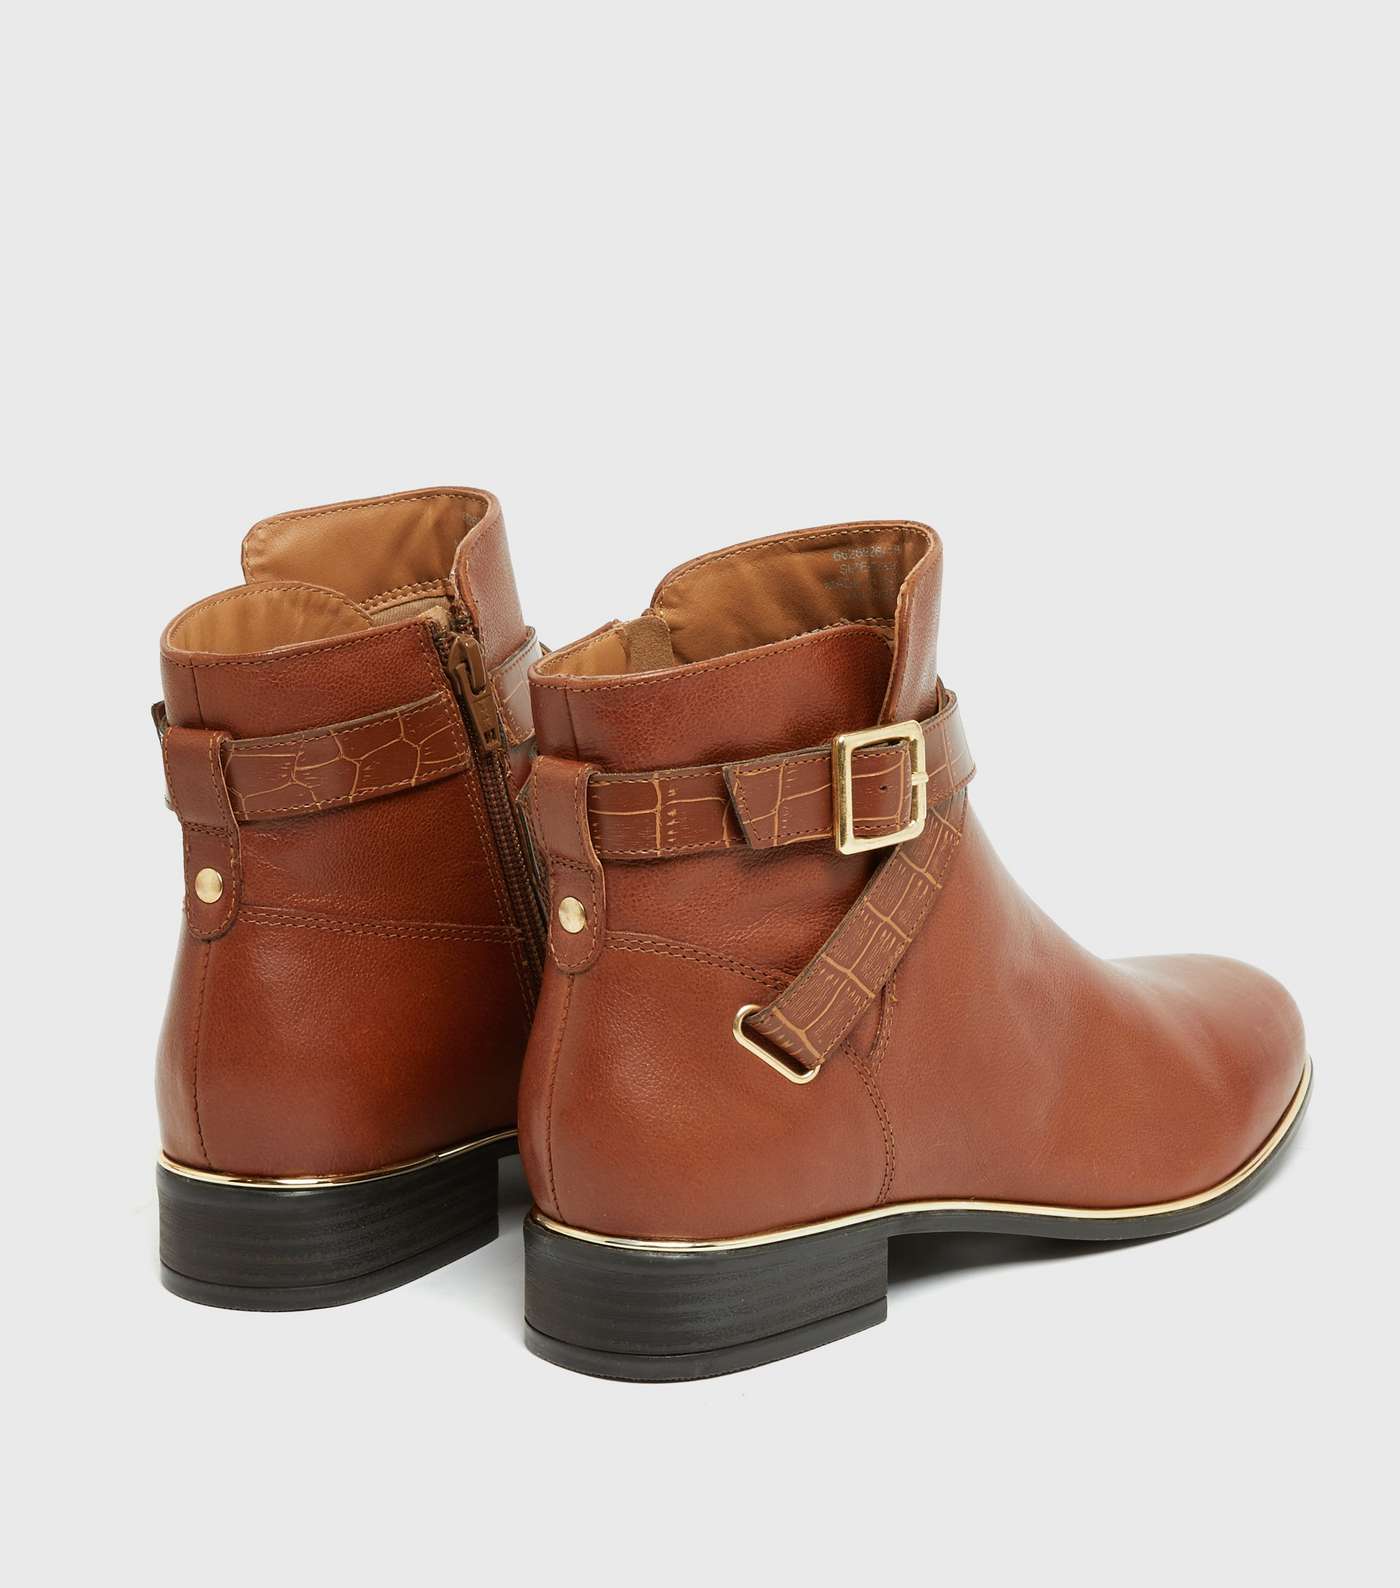 Tan Leather Cross Strap Metal Trim Ankle Boots Image 4